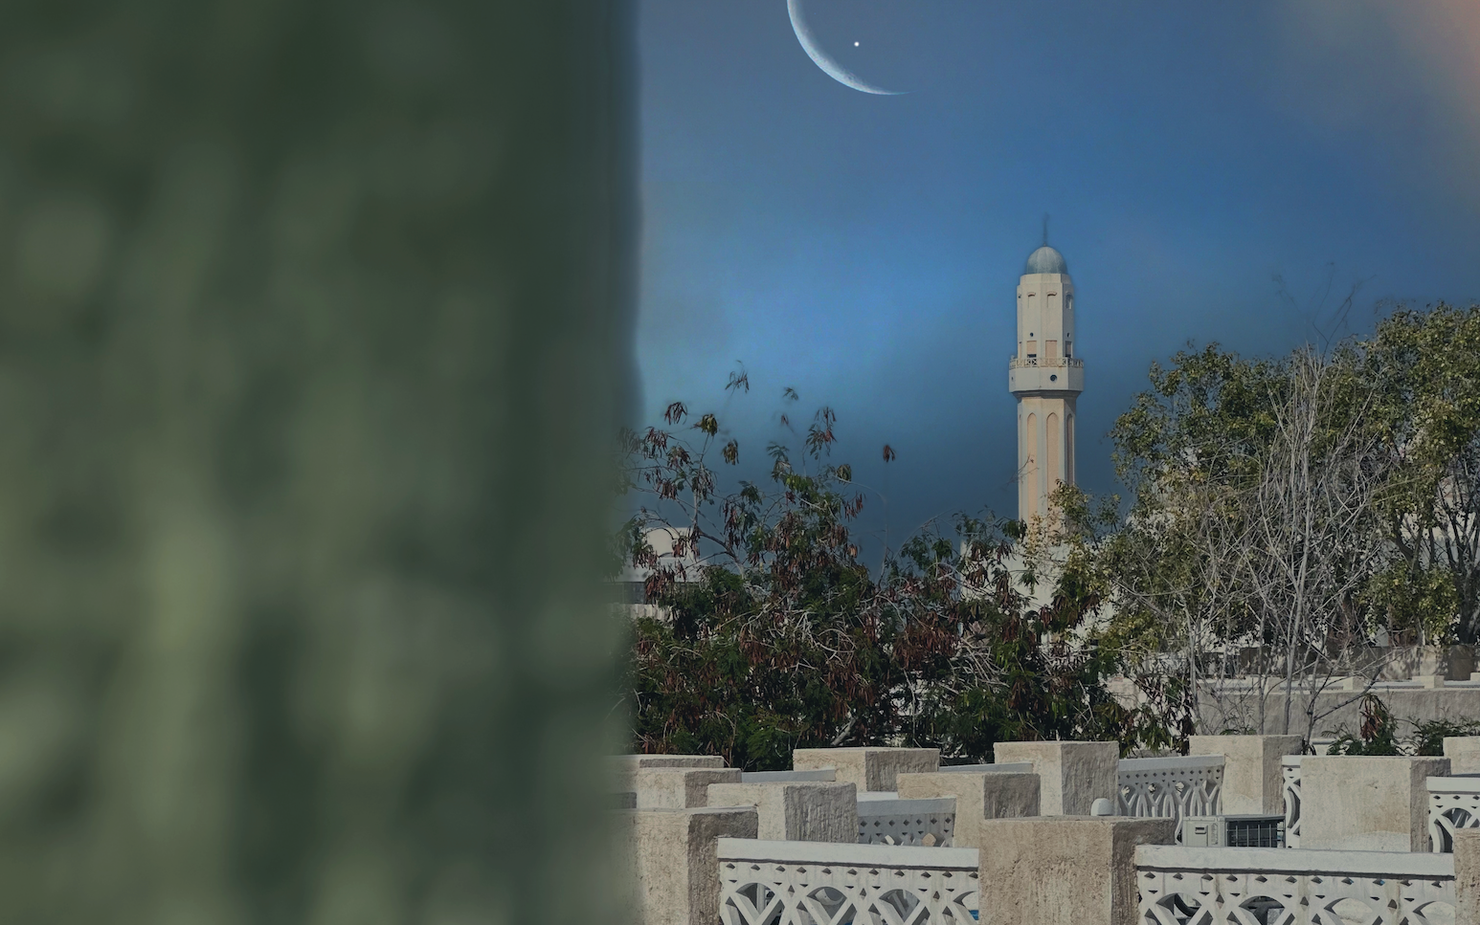 image of a mosque in the background with a night sky and moon